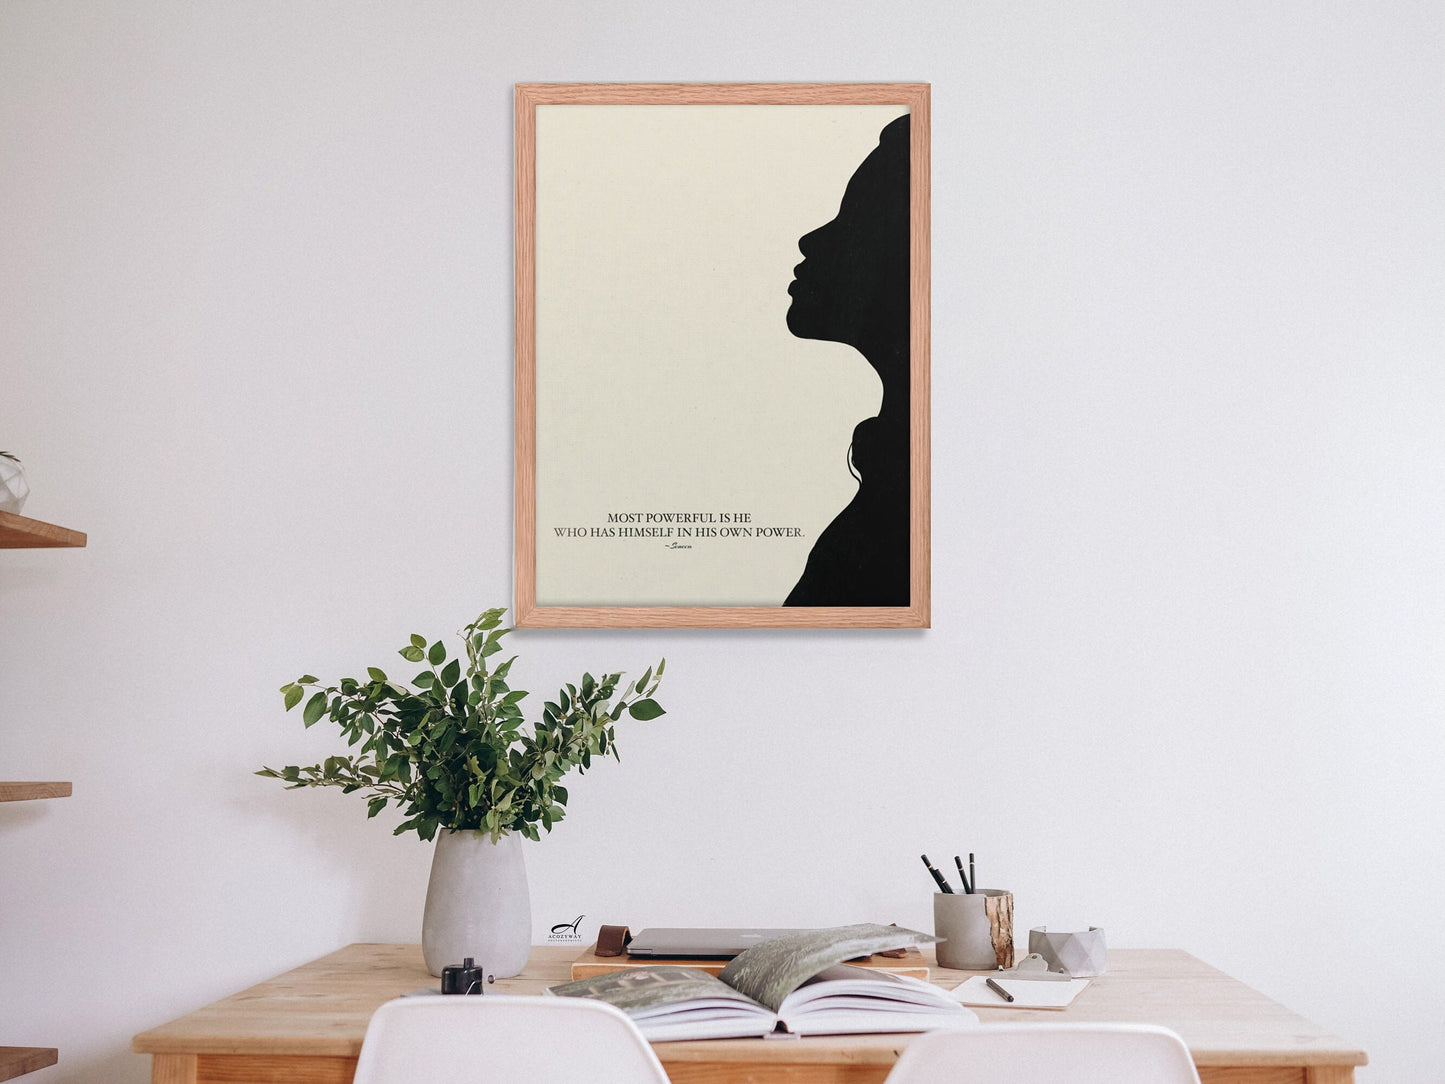 Stoic Wall Art, Seneca Philosophy Quote Art Print, Motivational Poster, Most powerful is he who has himself in his own power